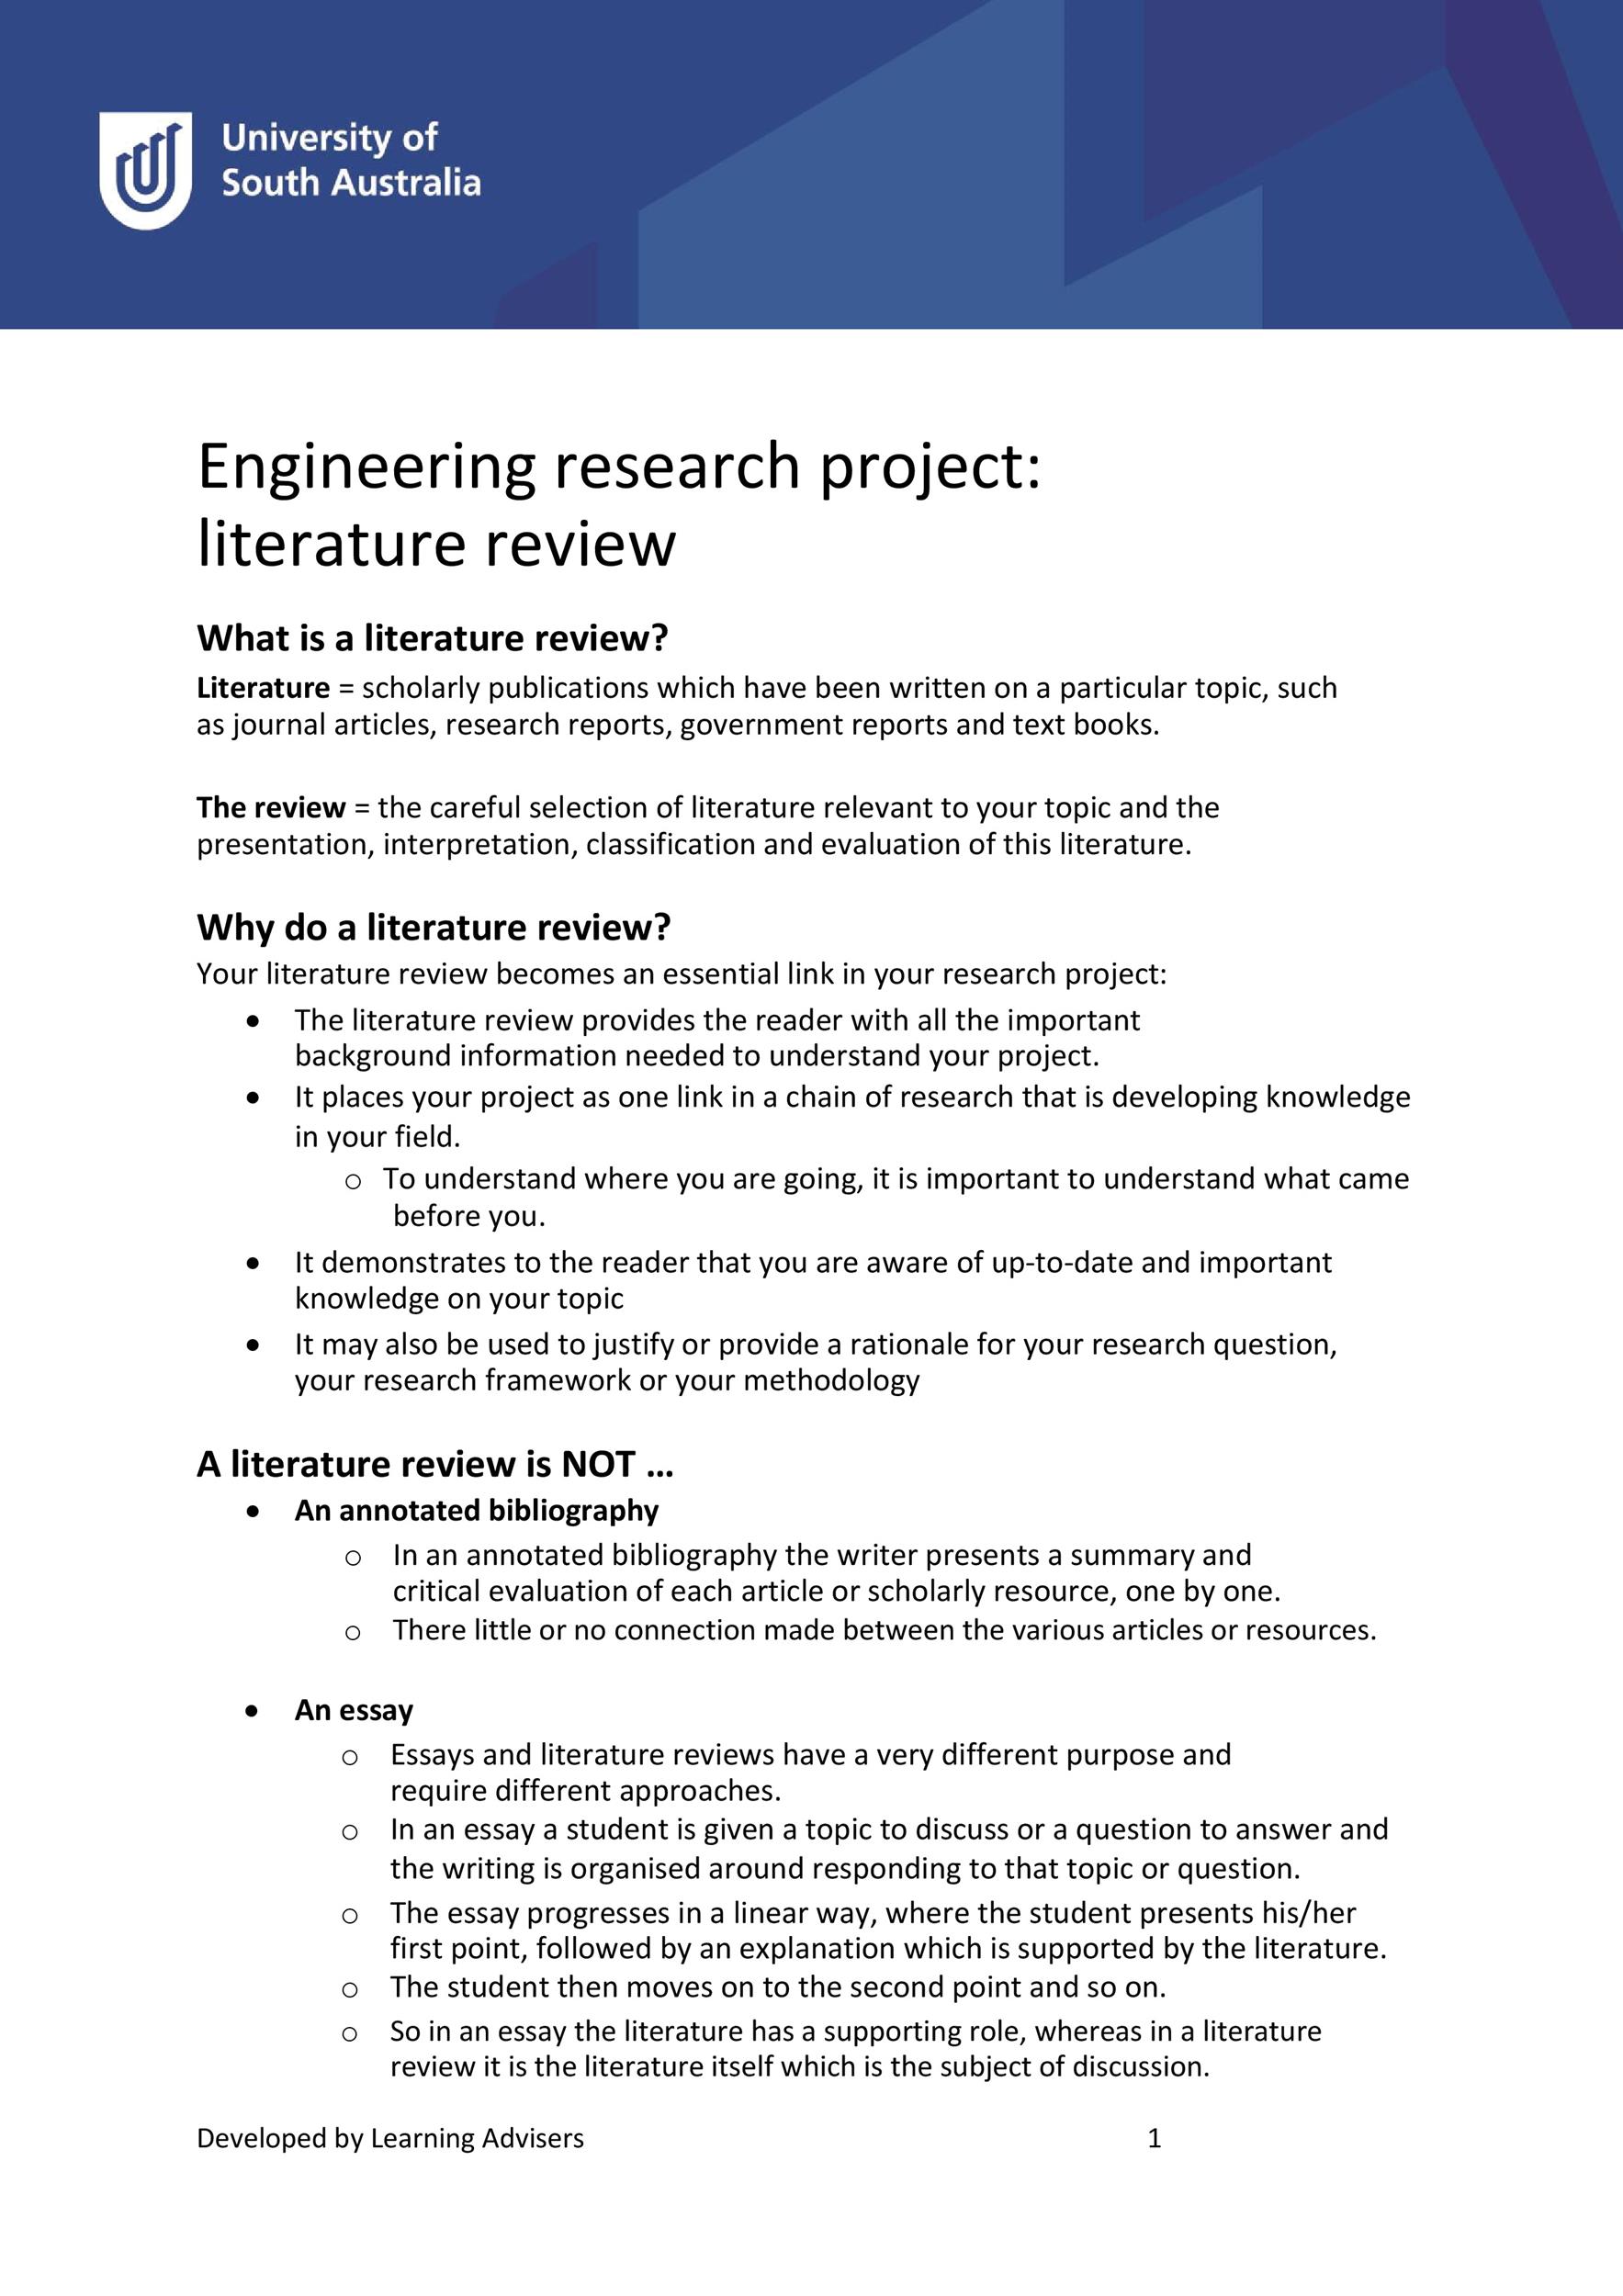 how to write literature survey for engineering project